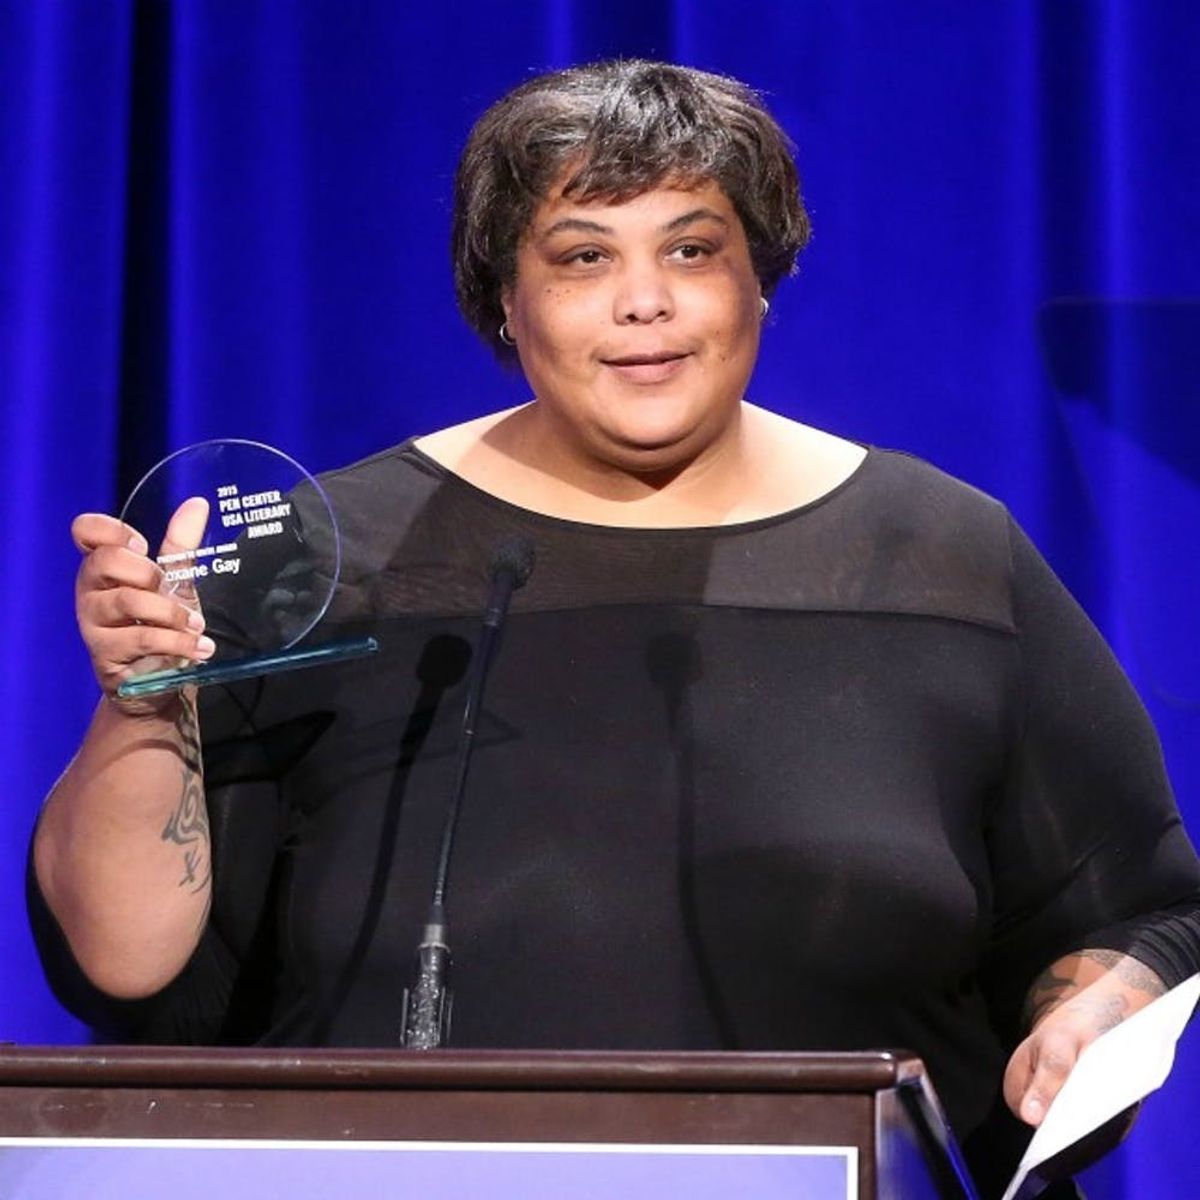 Author Roxane Gay Has Some Important Words to Say About Body Positivity